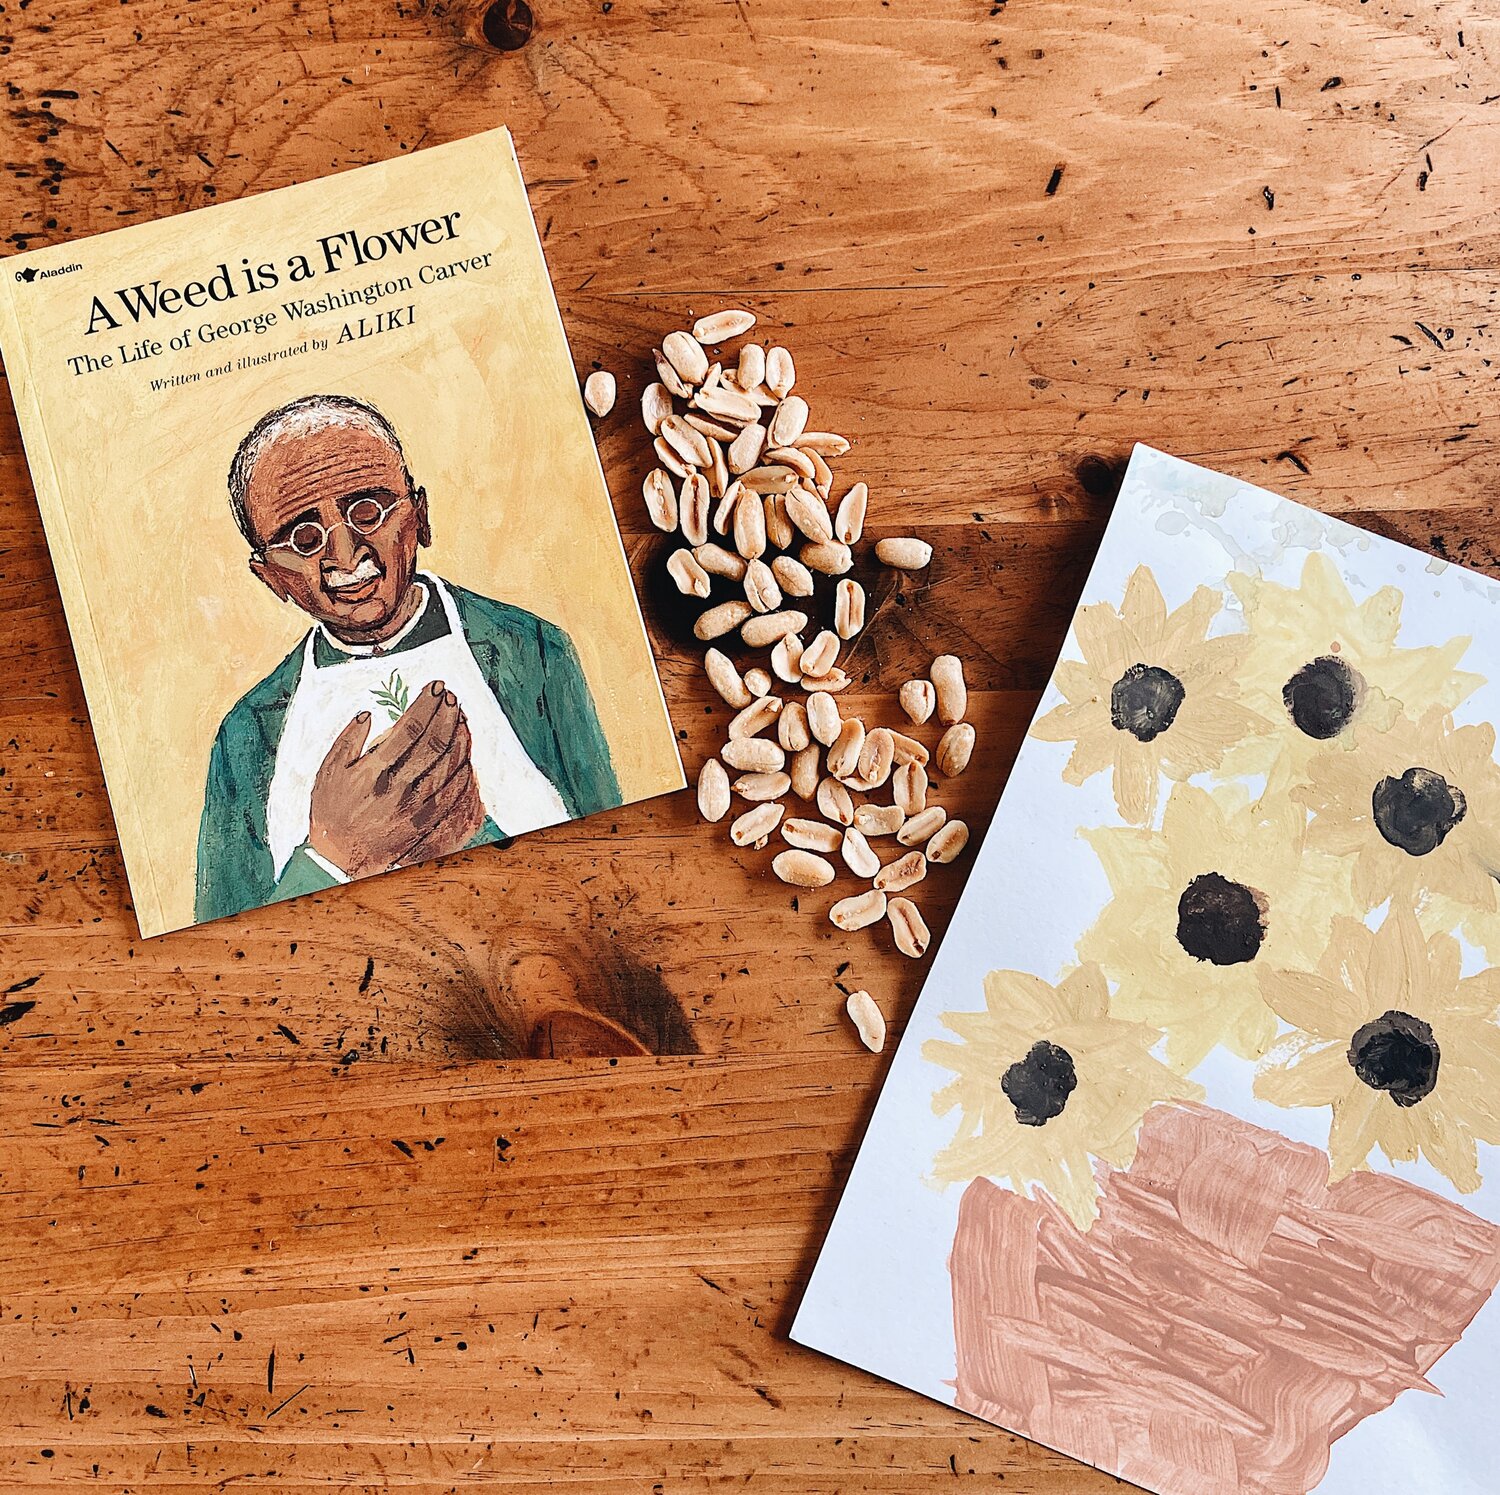 History is our favorite subject, and we love reading picture book biographies to learn about amazing people who have overcome hardship and modeled bravery in the face of adversity. We hope you enjoy learning about some of these people as well.